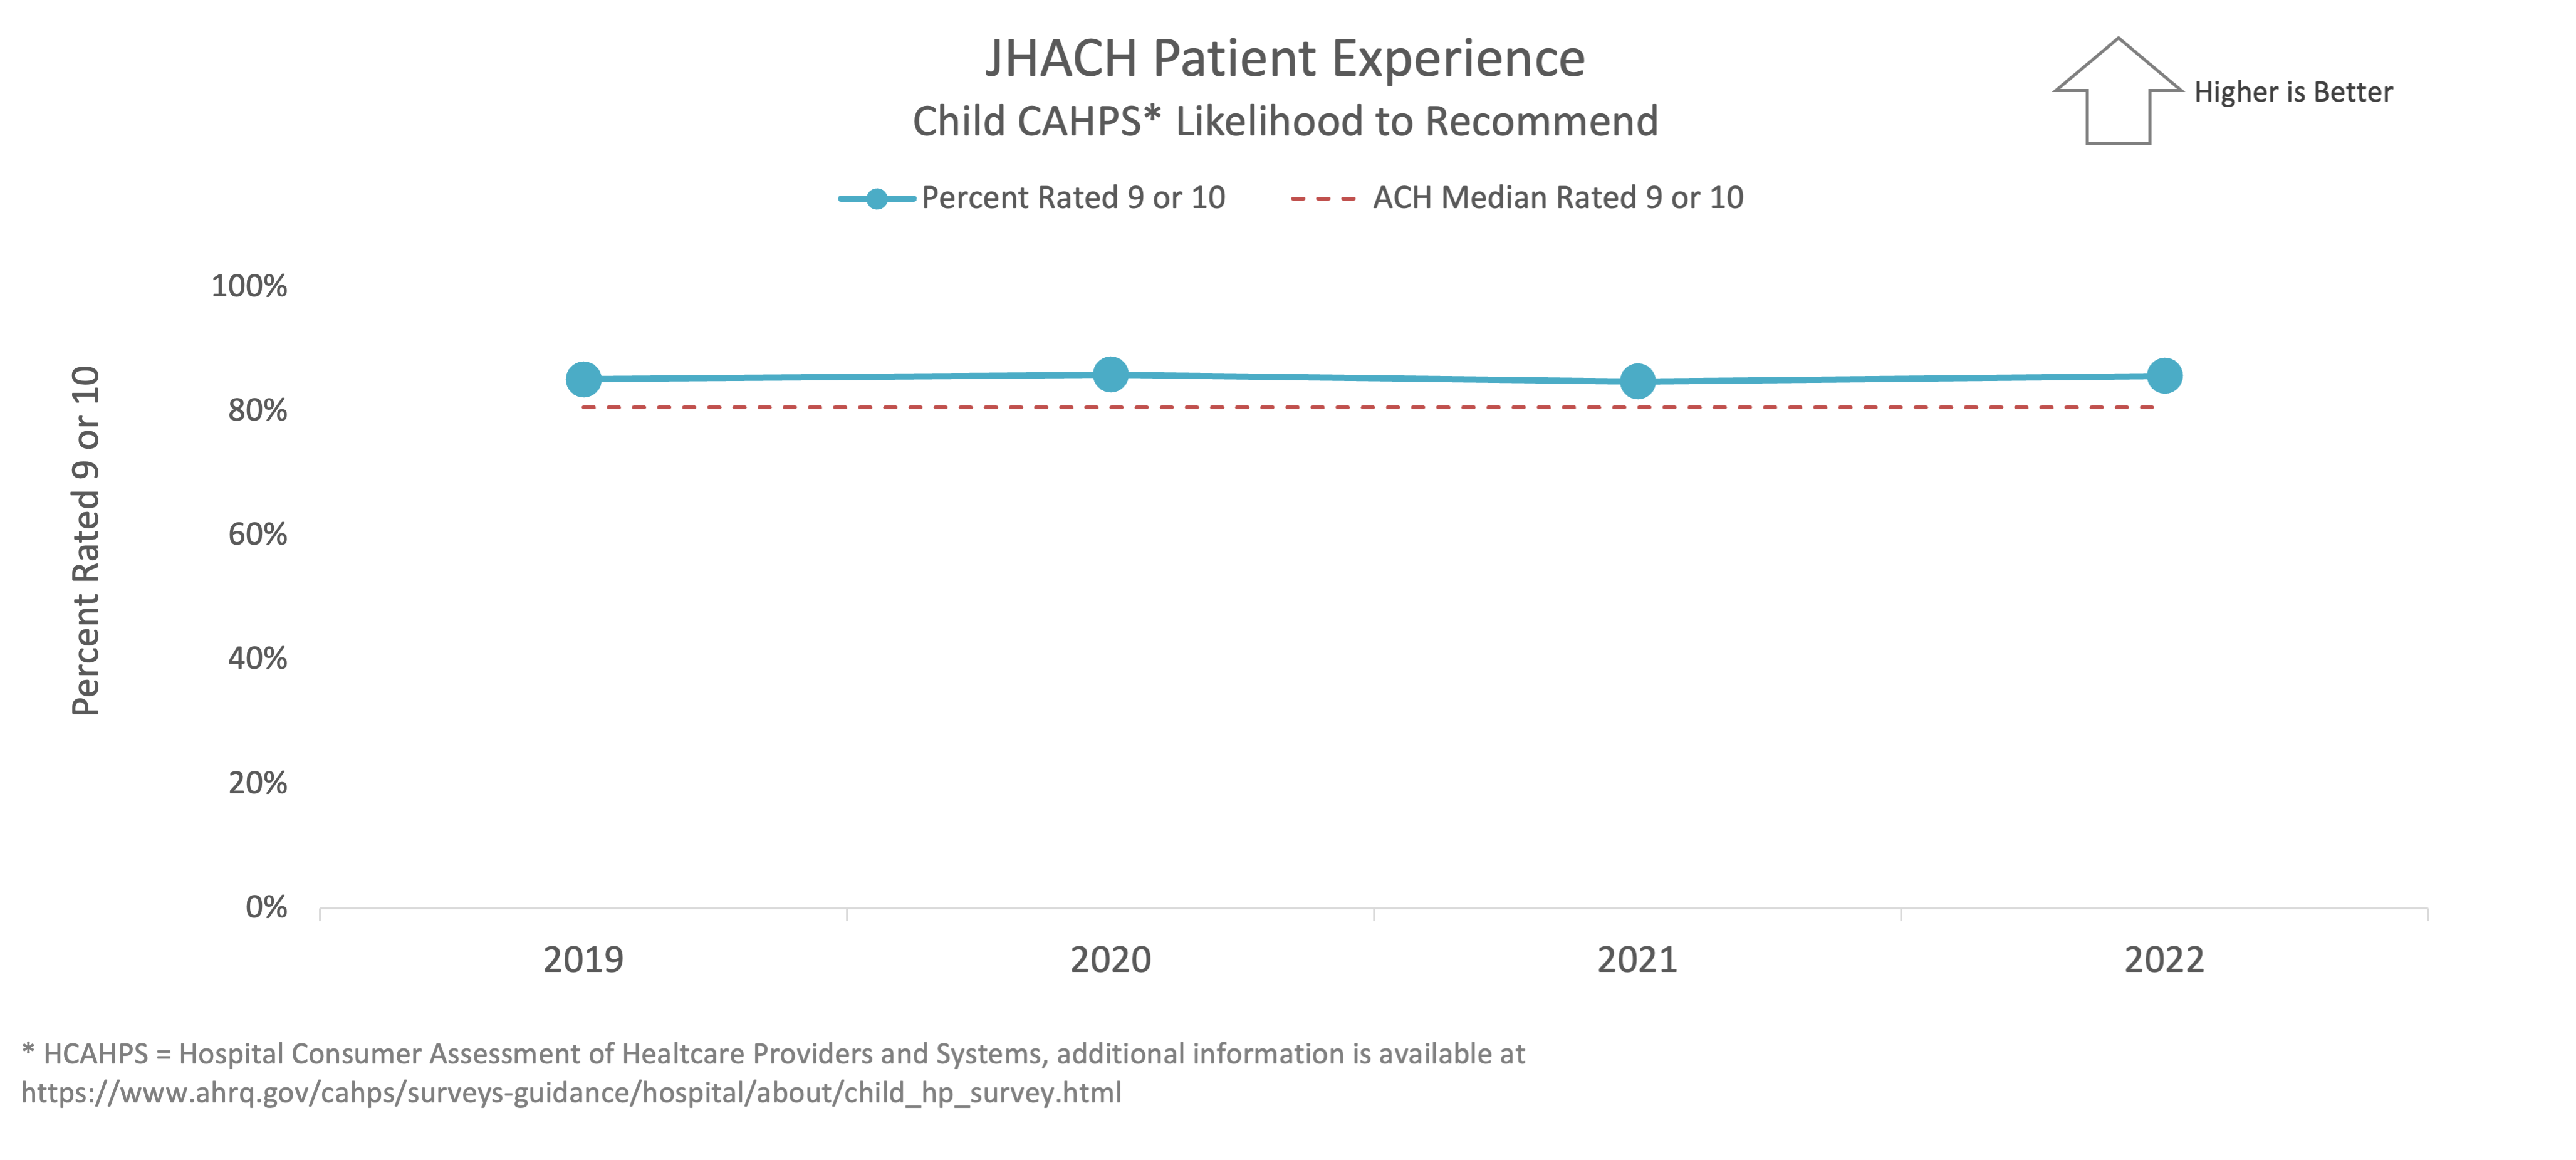 Patient Experience through 2022.